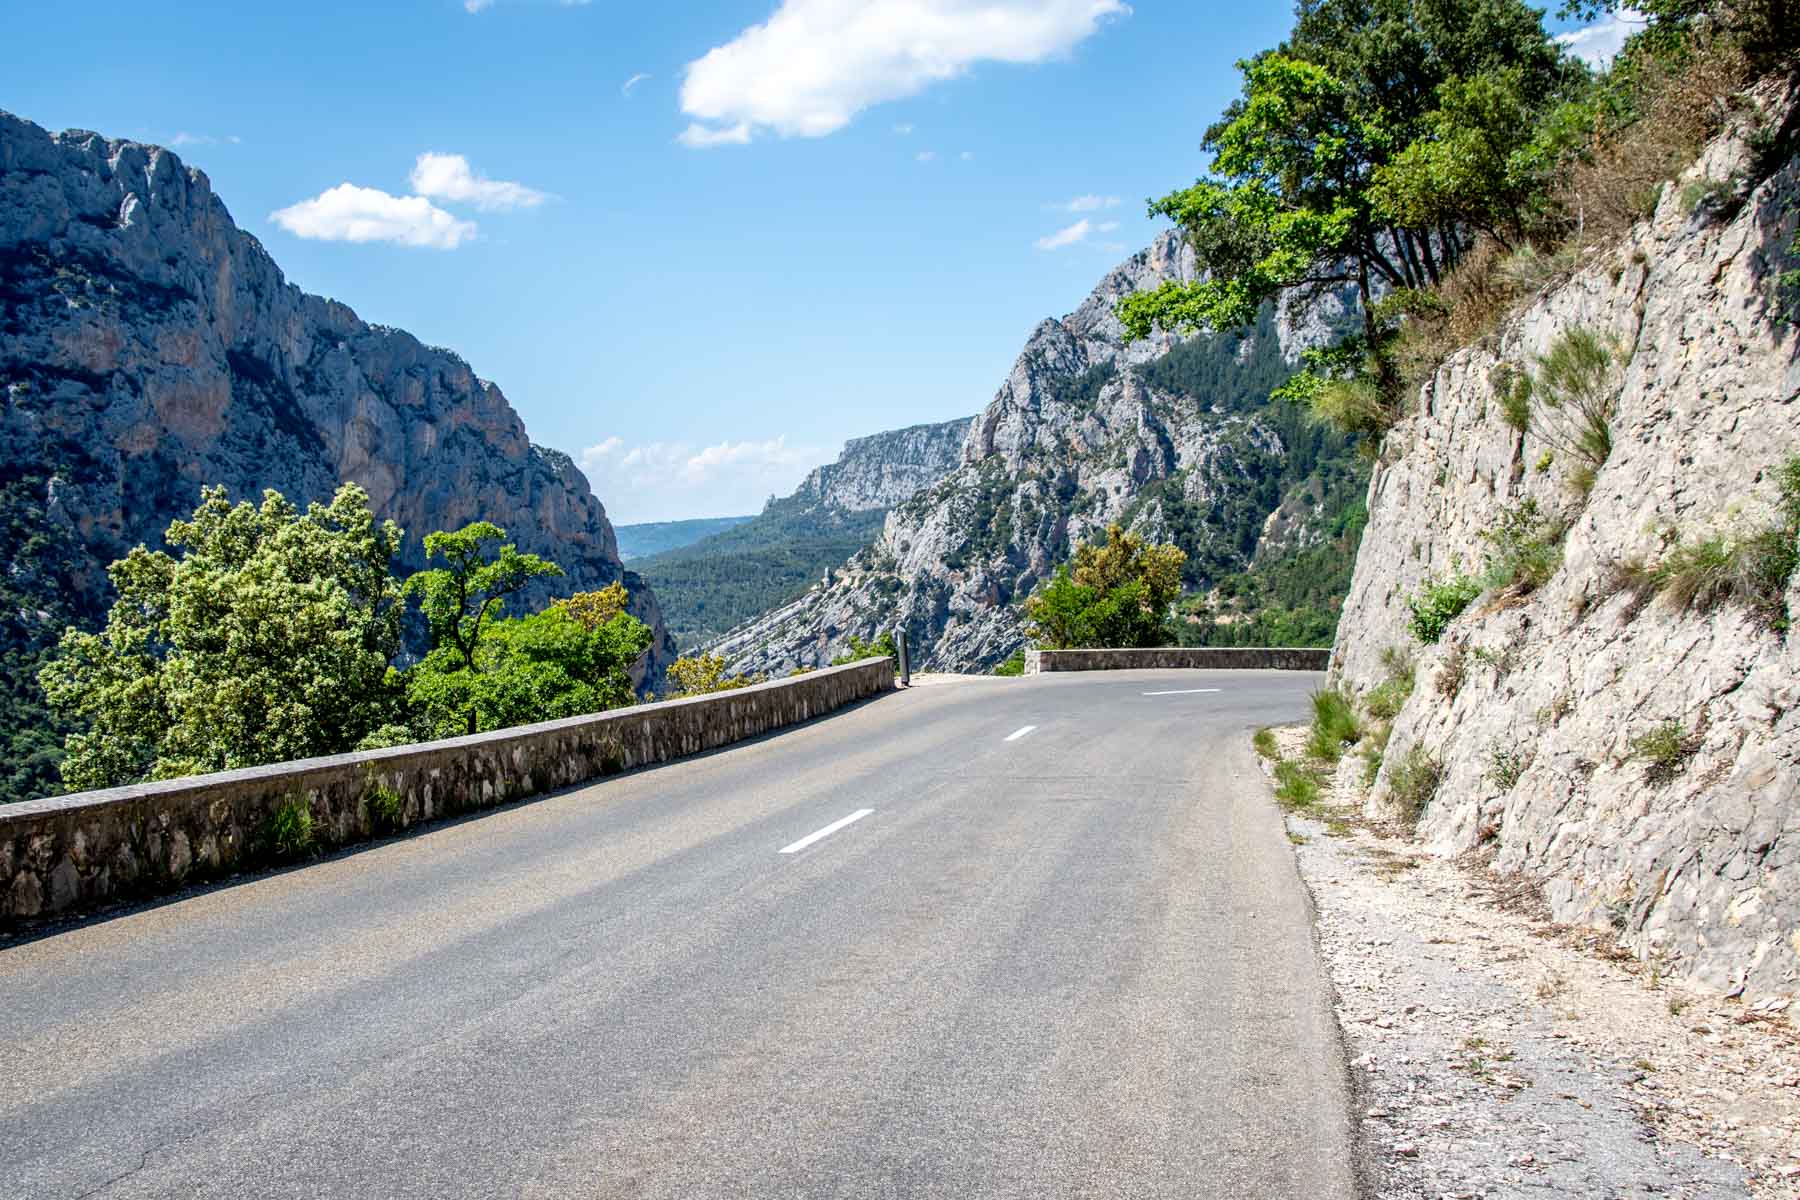 A two-land road along a gorge in France